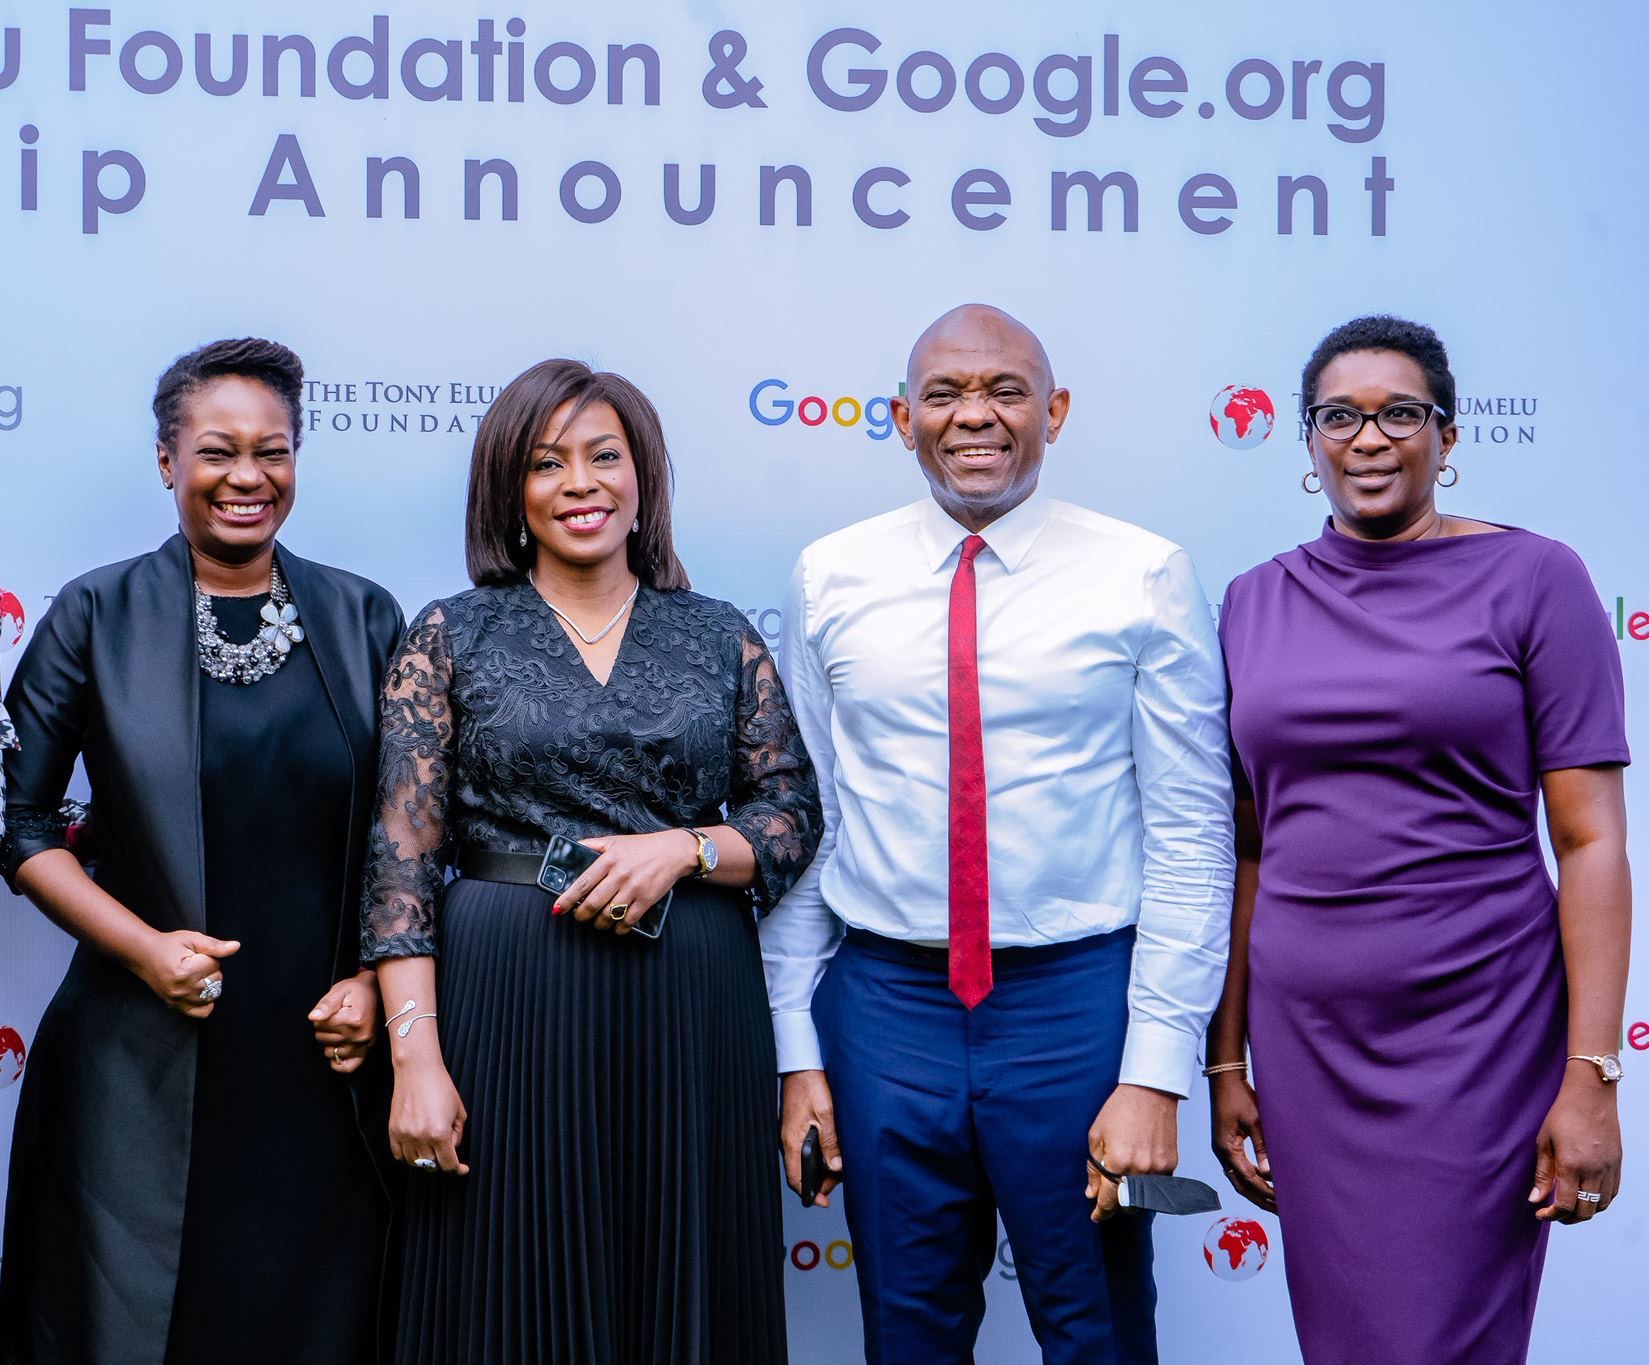 Tony Elumelu Foundation And Google.Org Announce Inaugural Fellowship Program To Support African Entrepreneurs